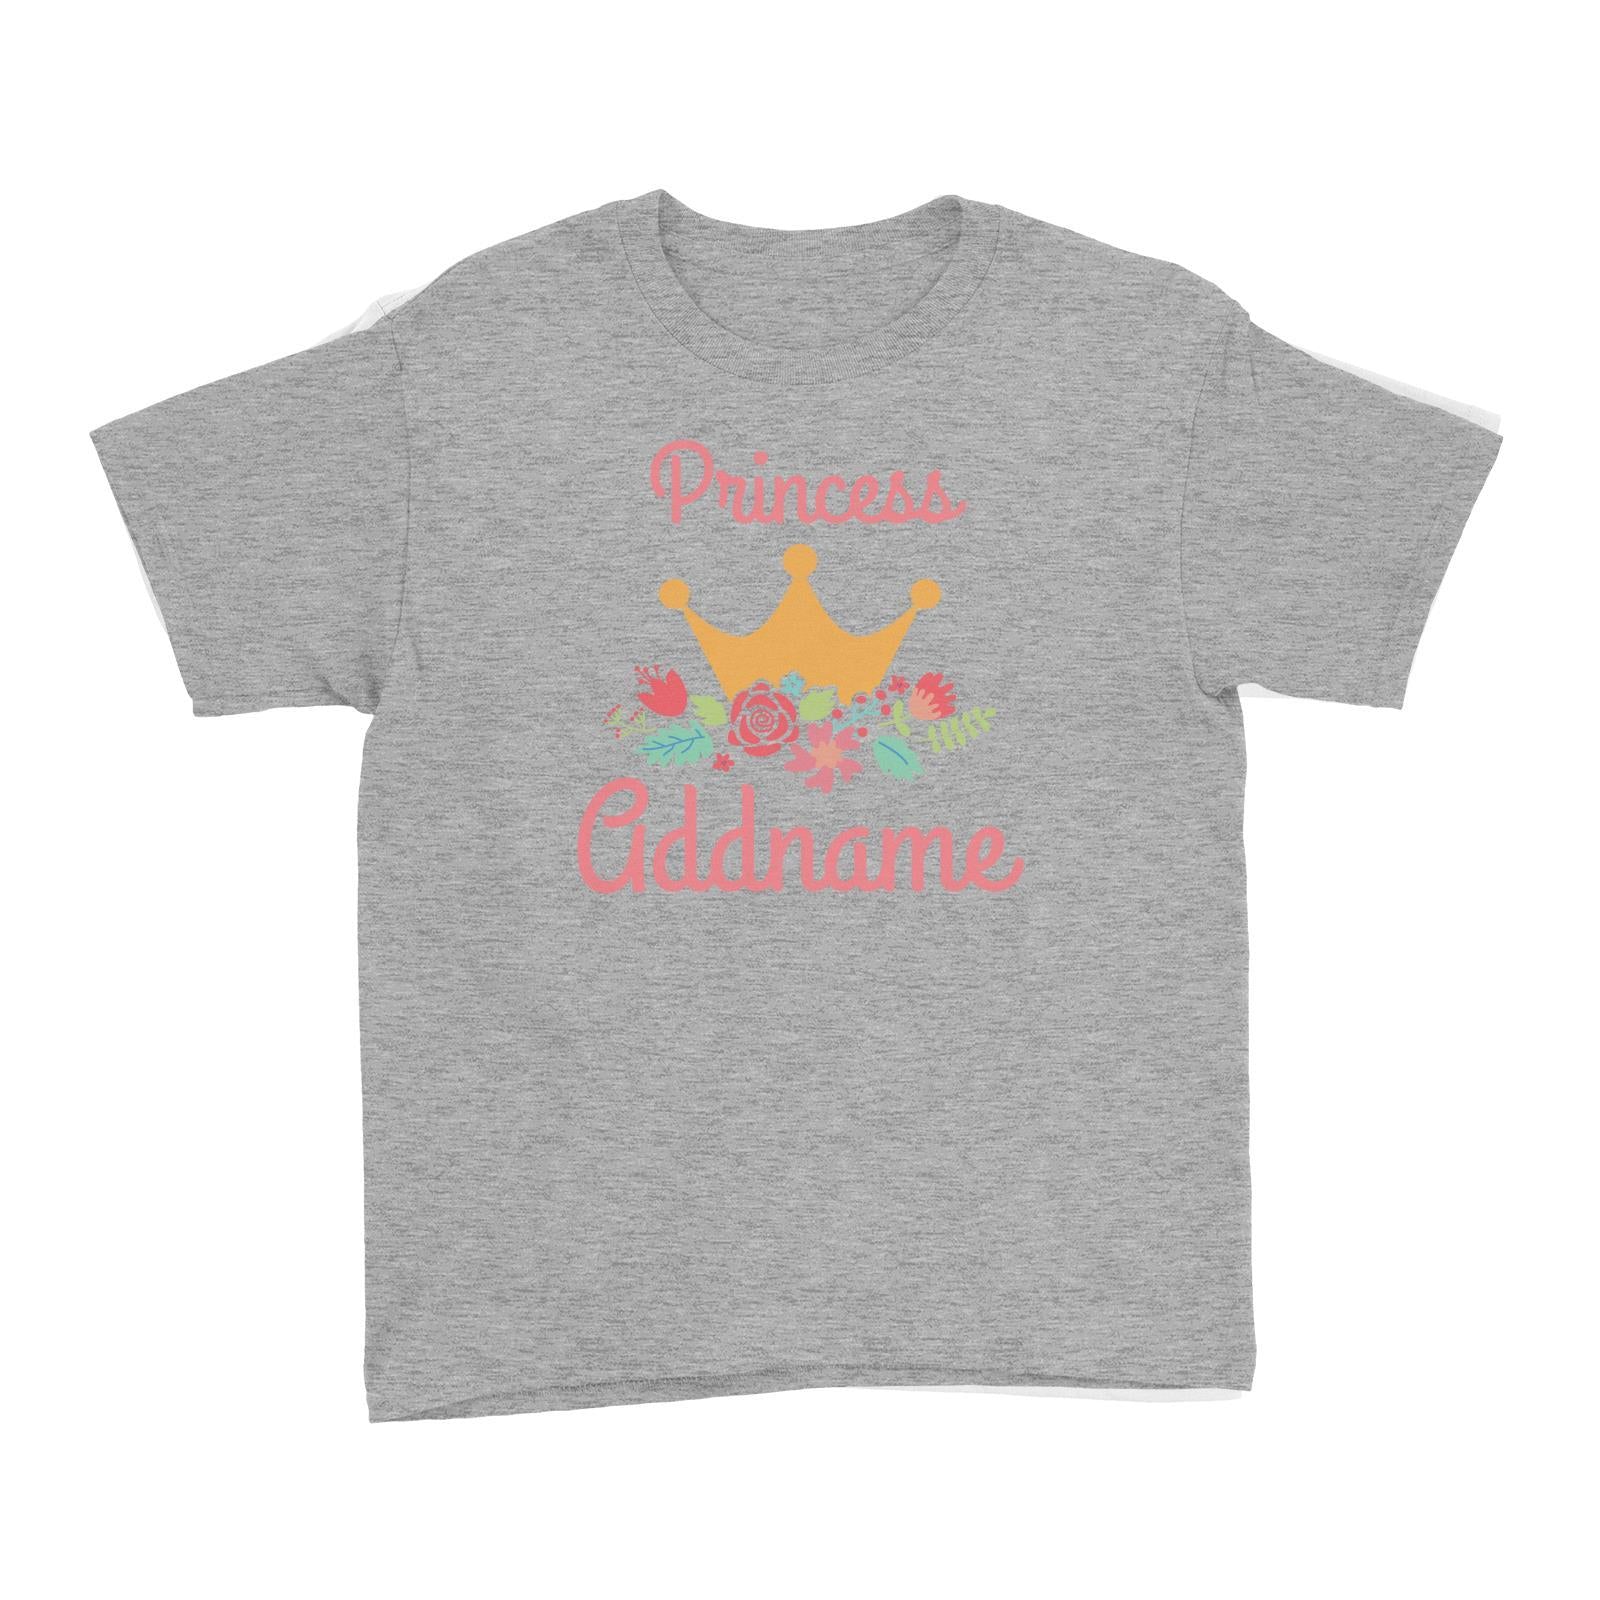 Princess Addname with Tiara and Flowers Kid's T-Shirt